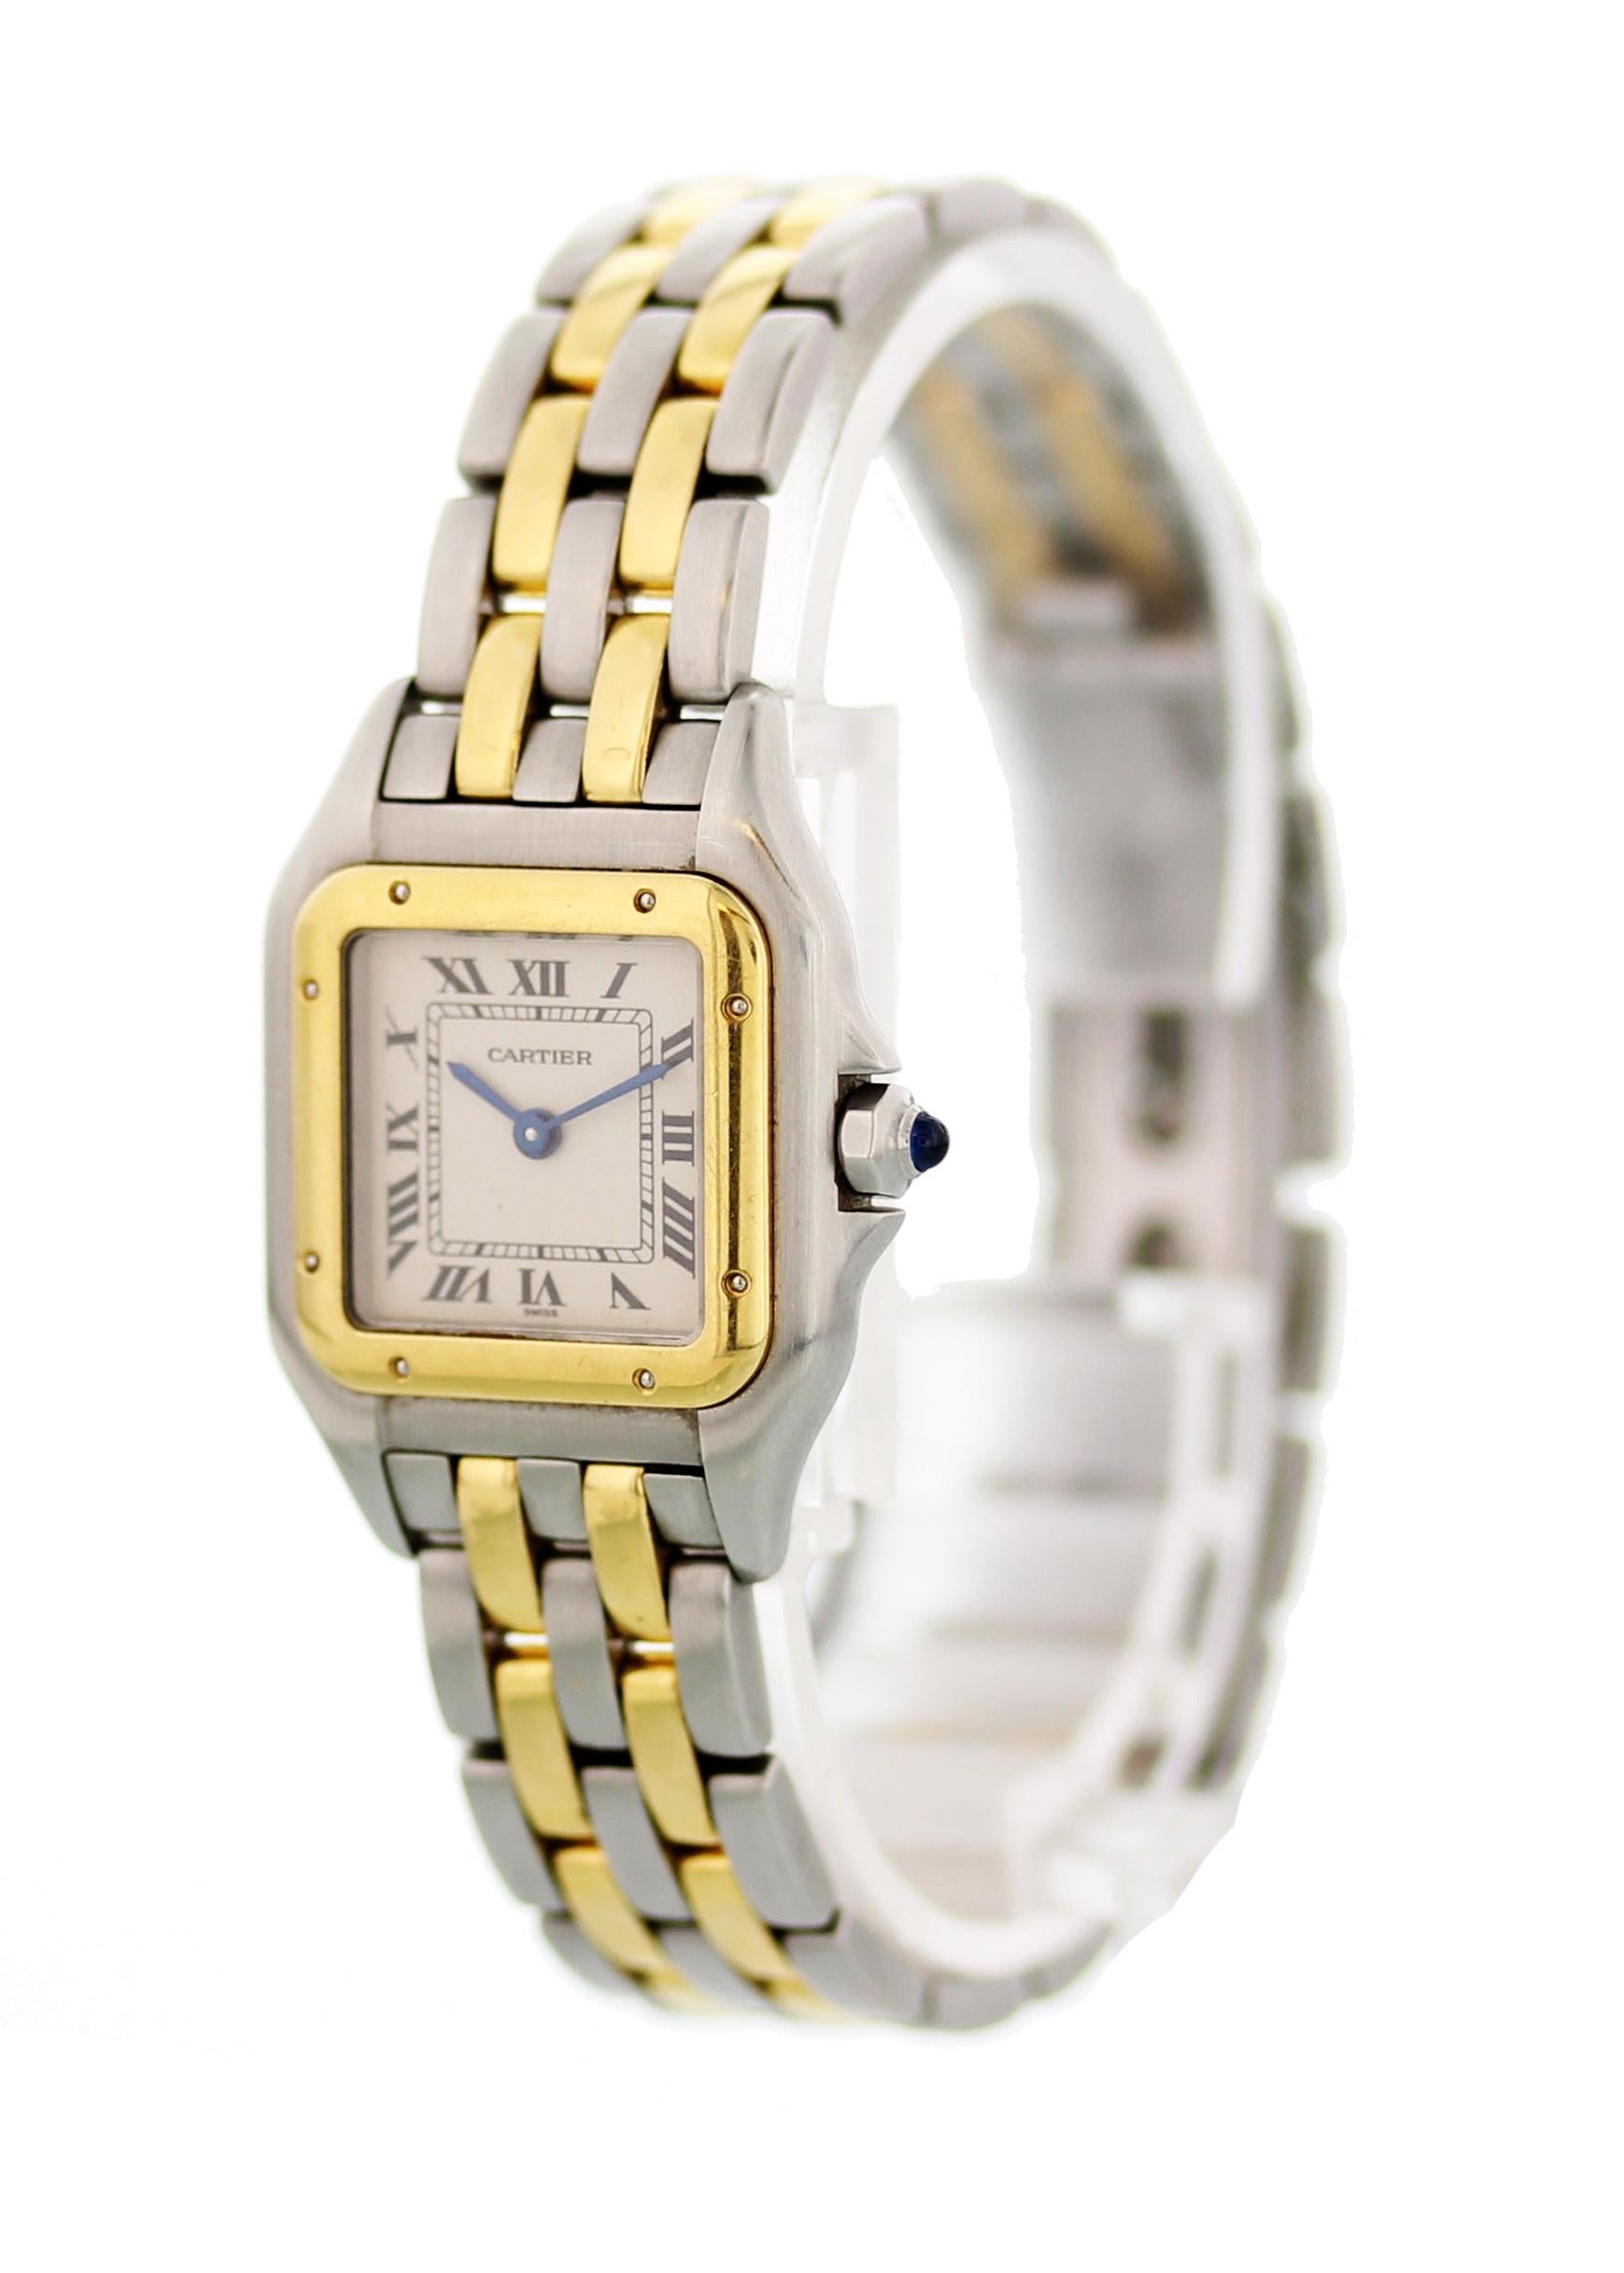 Cartier Panthere 1120 Ladies Watch. 
22mm Stainless Steel case. 
Yellow Gold Stationary bezel. 
Off-White dial with Blue steel hands and Roman numeral hour markers. 
Minute markers on the inner dial. 
Stainless Steel Bracelet with Butterfly Clasp.